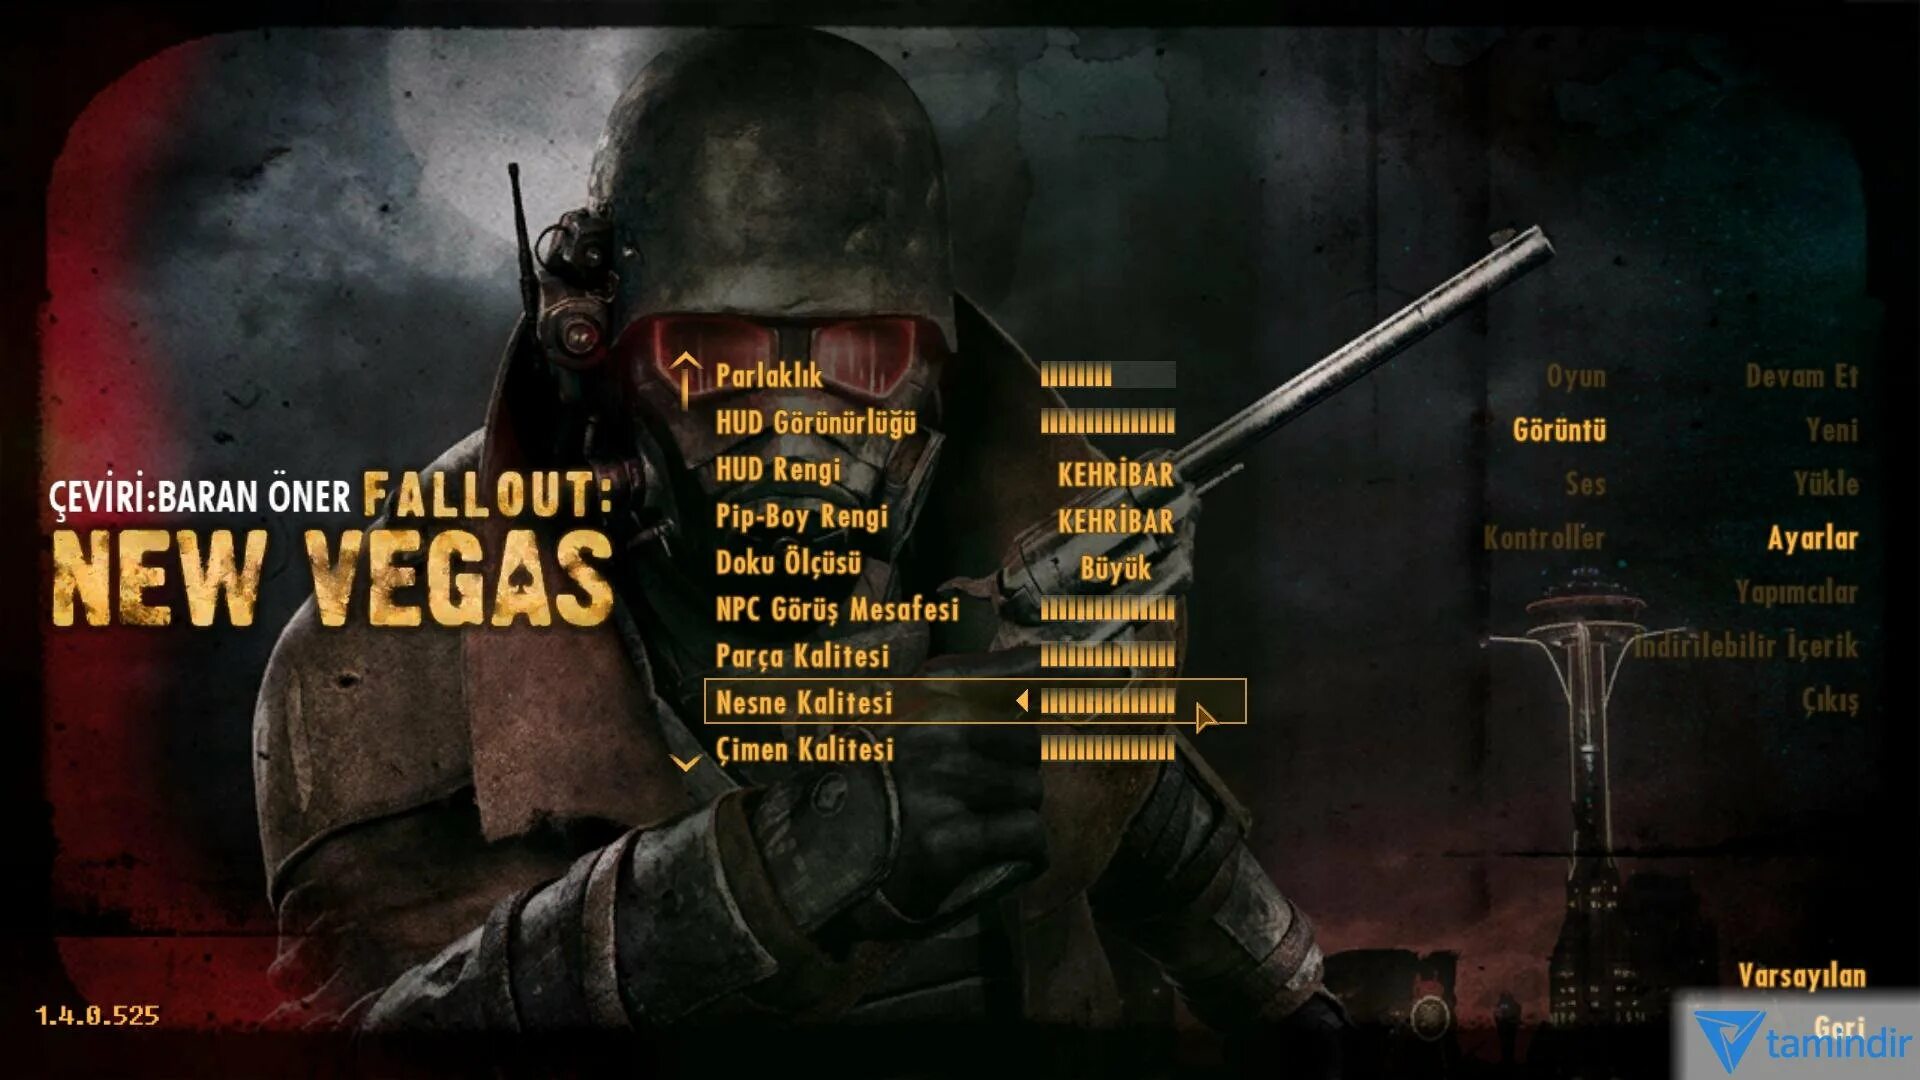 Fallout New Vegas Ultimate Edition ps3 русская версия. Фоллаут Нью Вегас 3 меню. Фоллаут Нью Вегас Ultimate Edition. Fallout New Vegas лаунчер. Fallout как поменять язык на русский